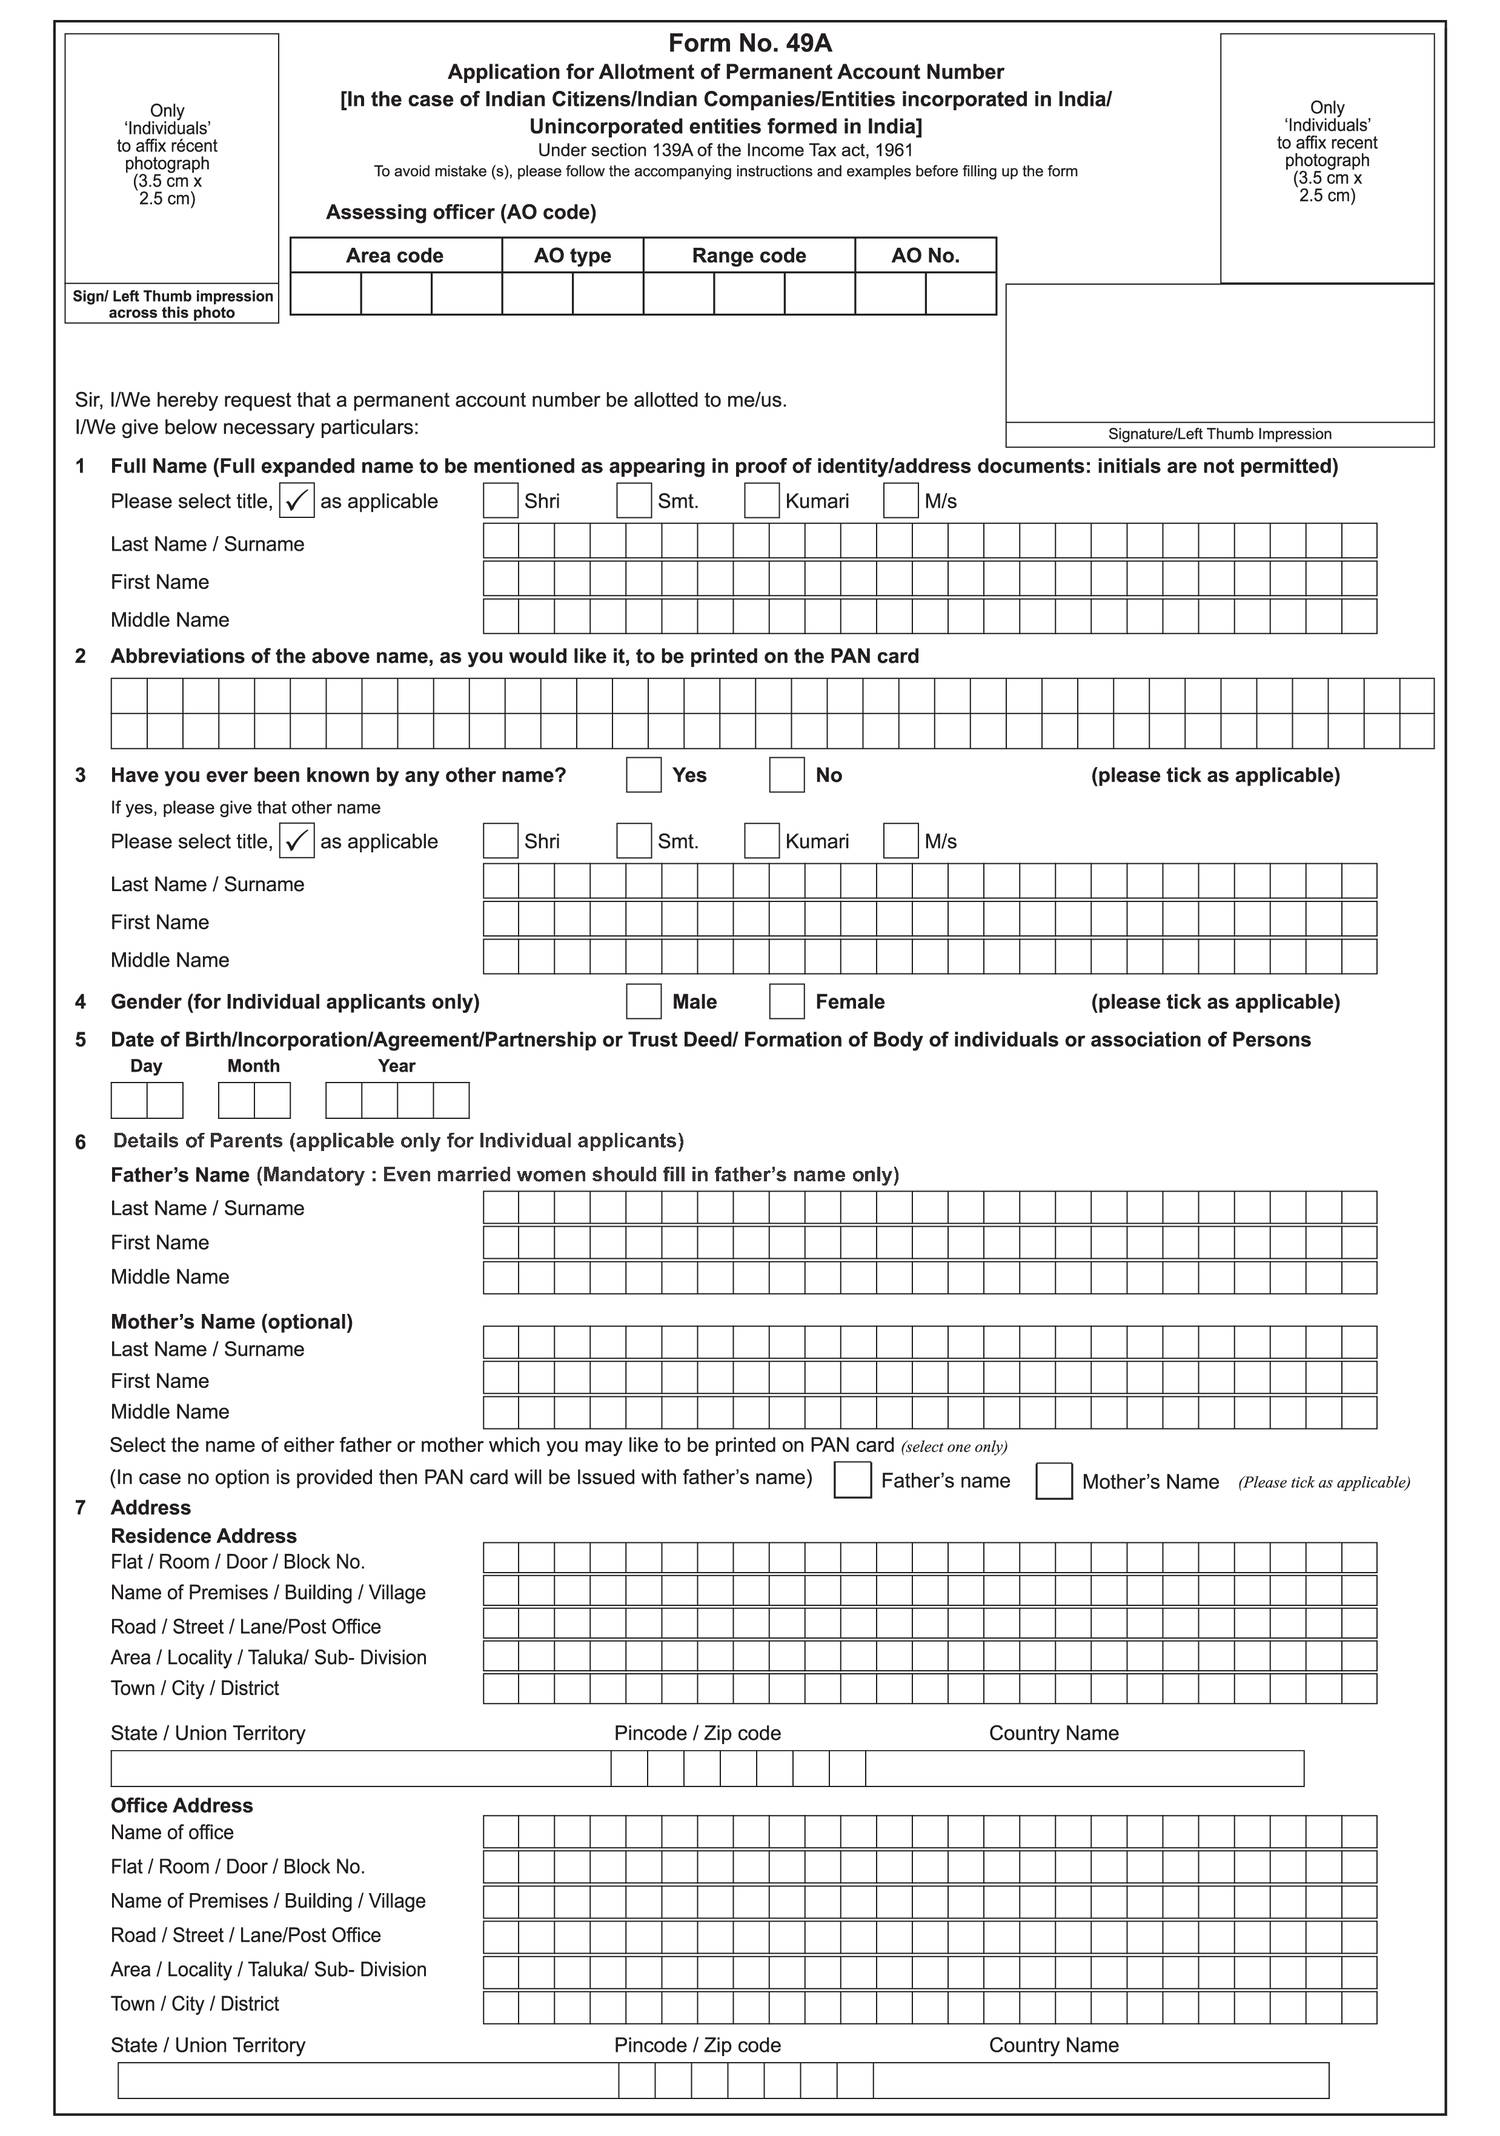 itr download online by pan number